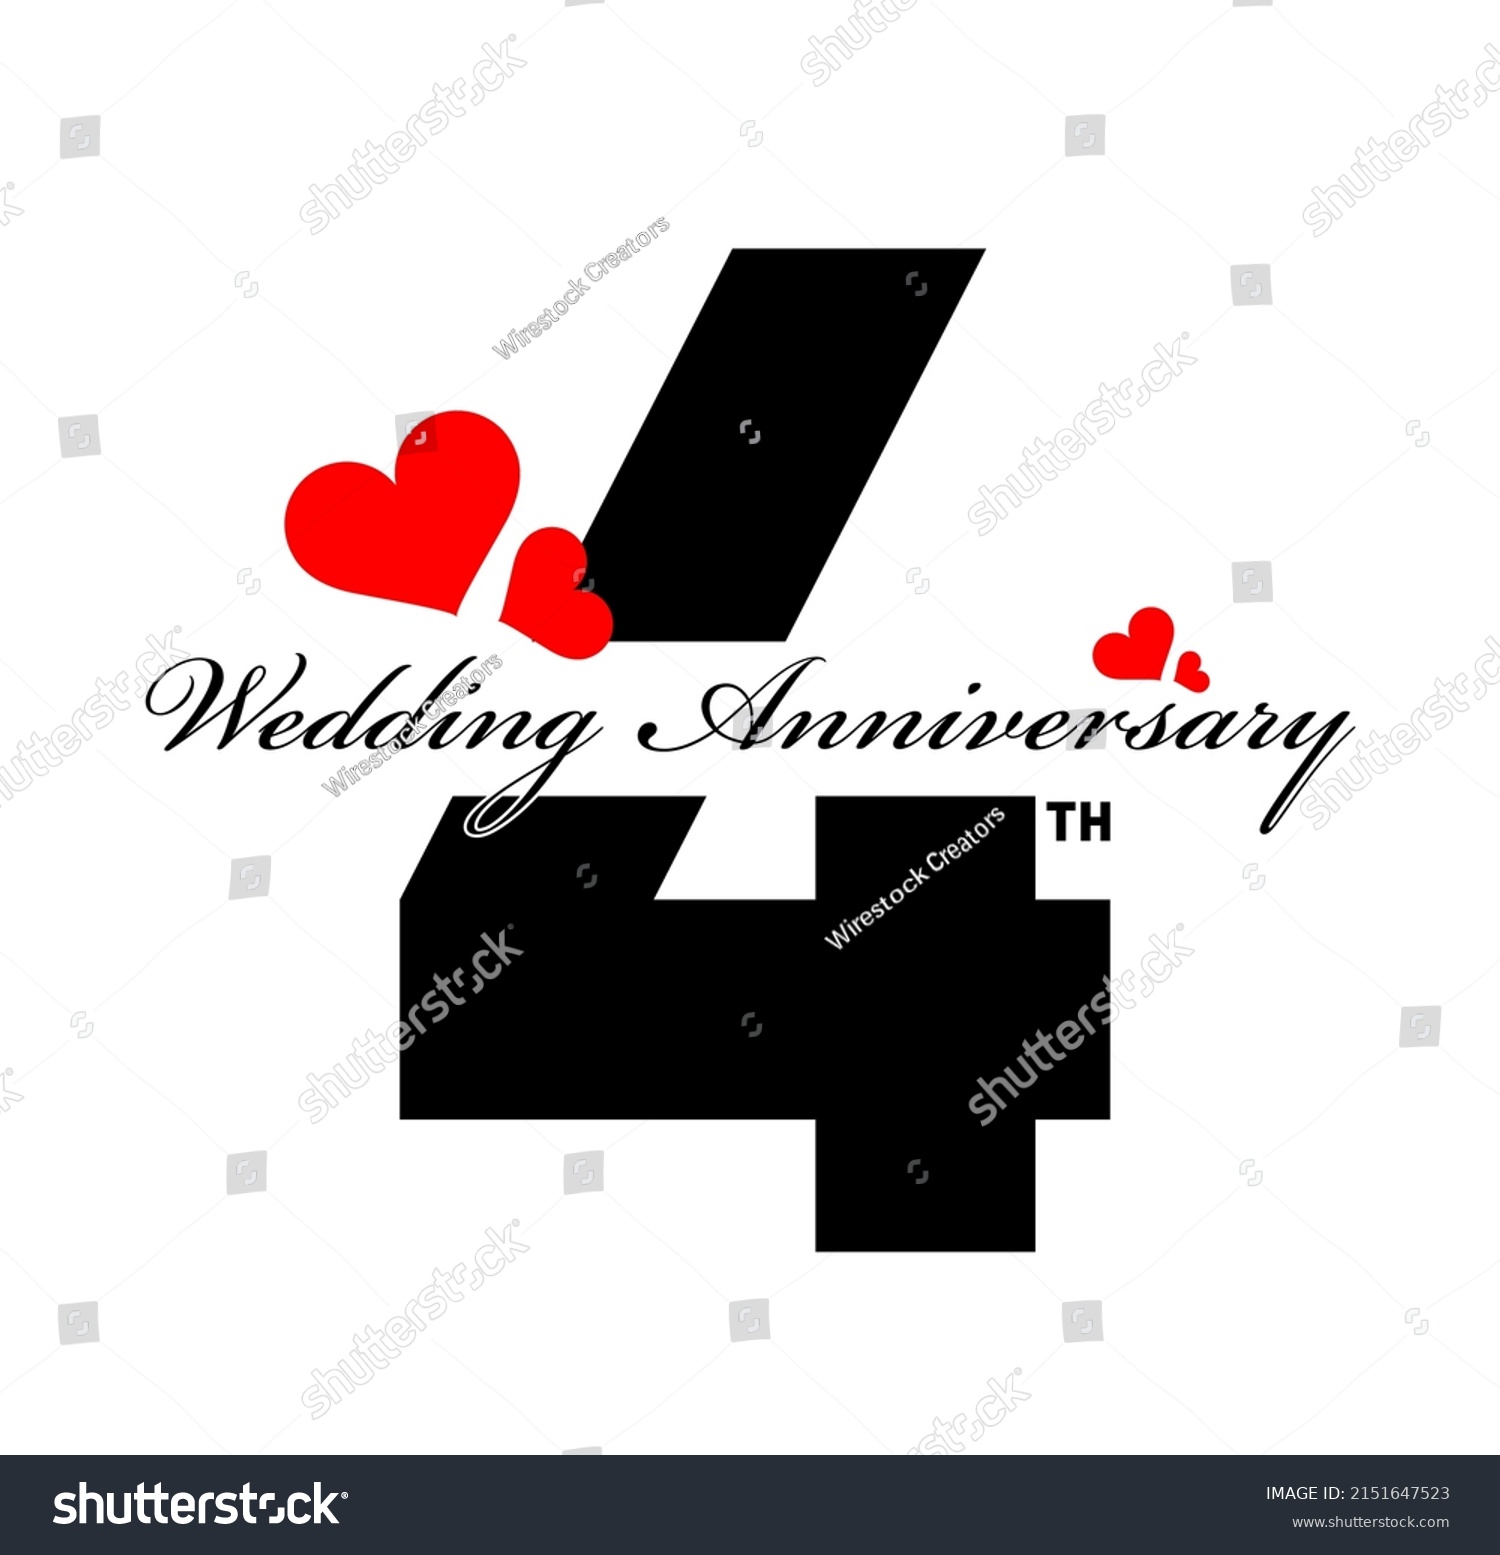 SVG of A illustration of the 4th Wedding Anniversary greeting with red hearts svg